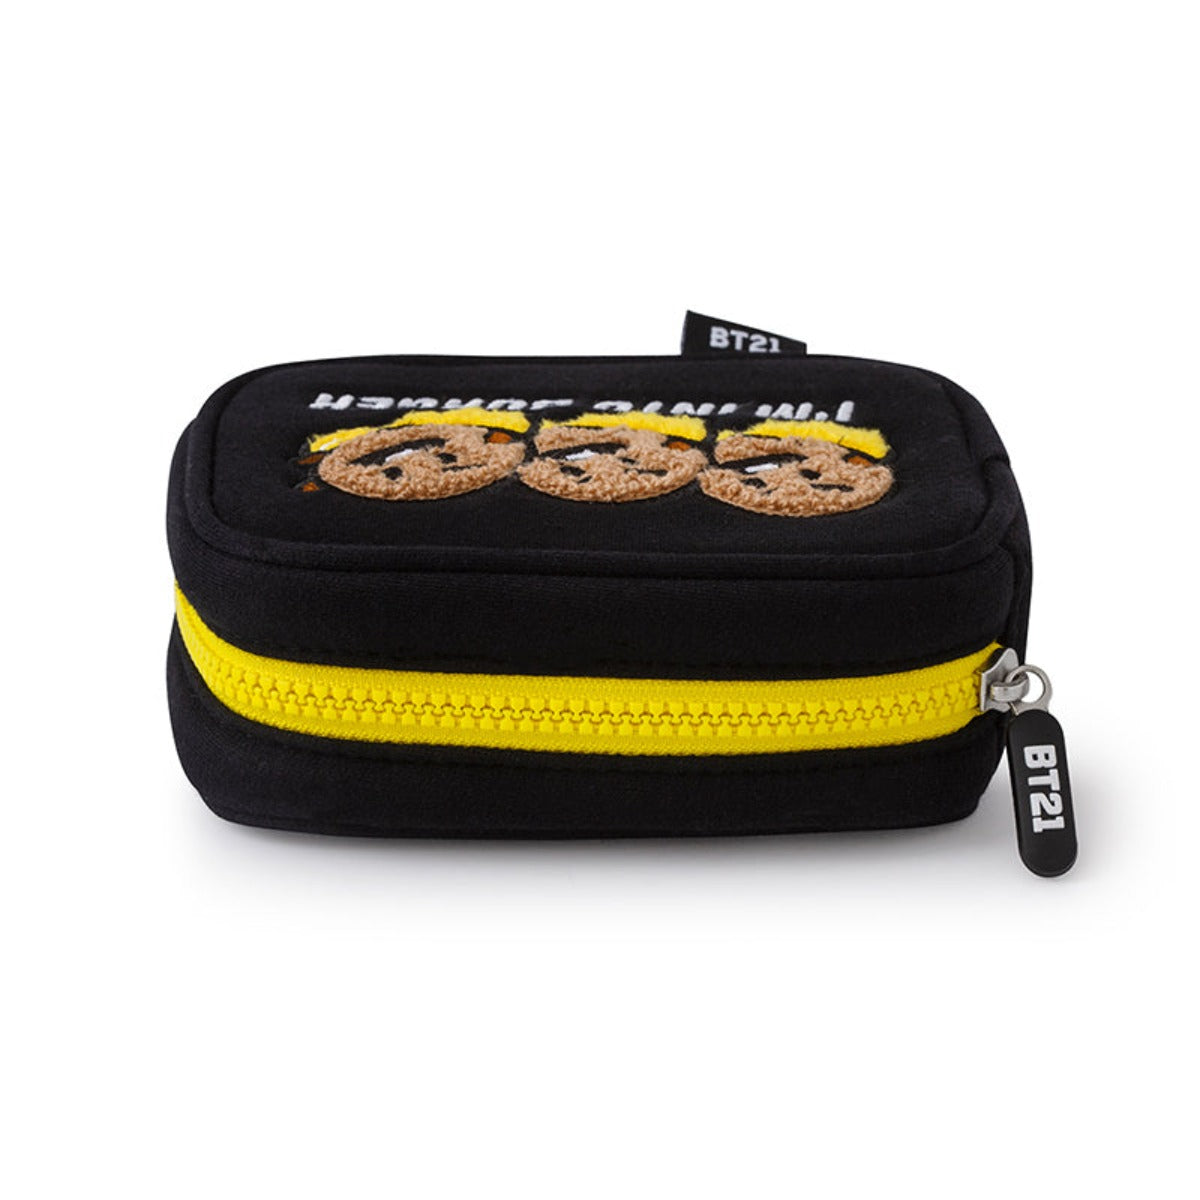 BT21 - Cable Pouch Shooky Black/Yellow